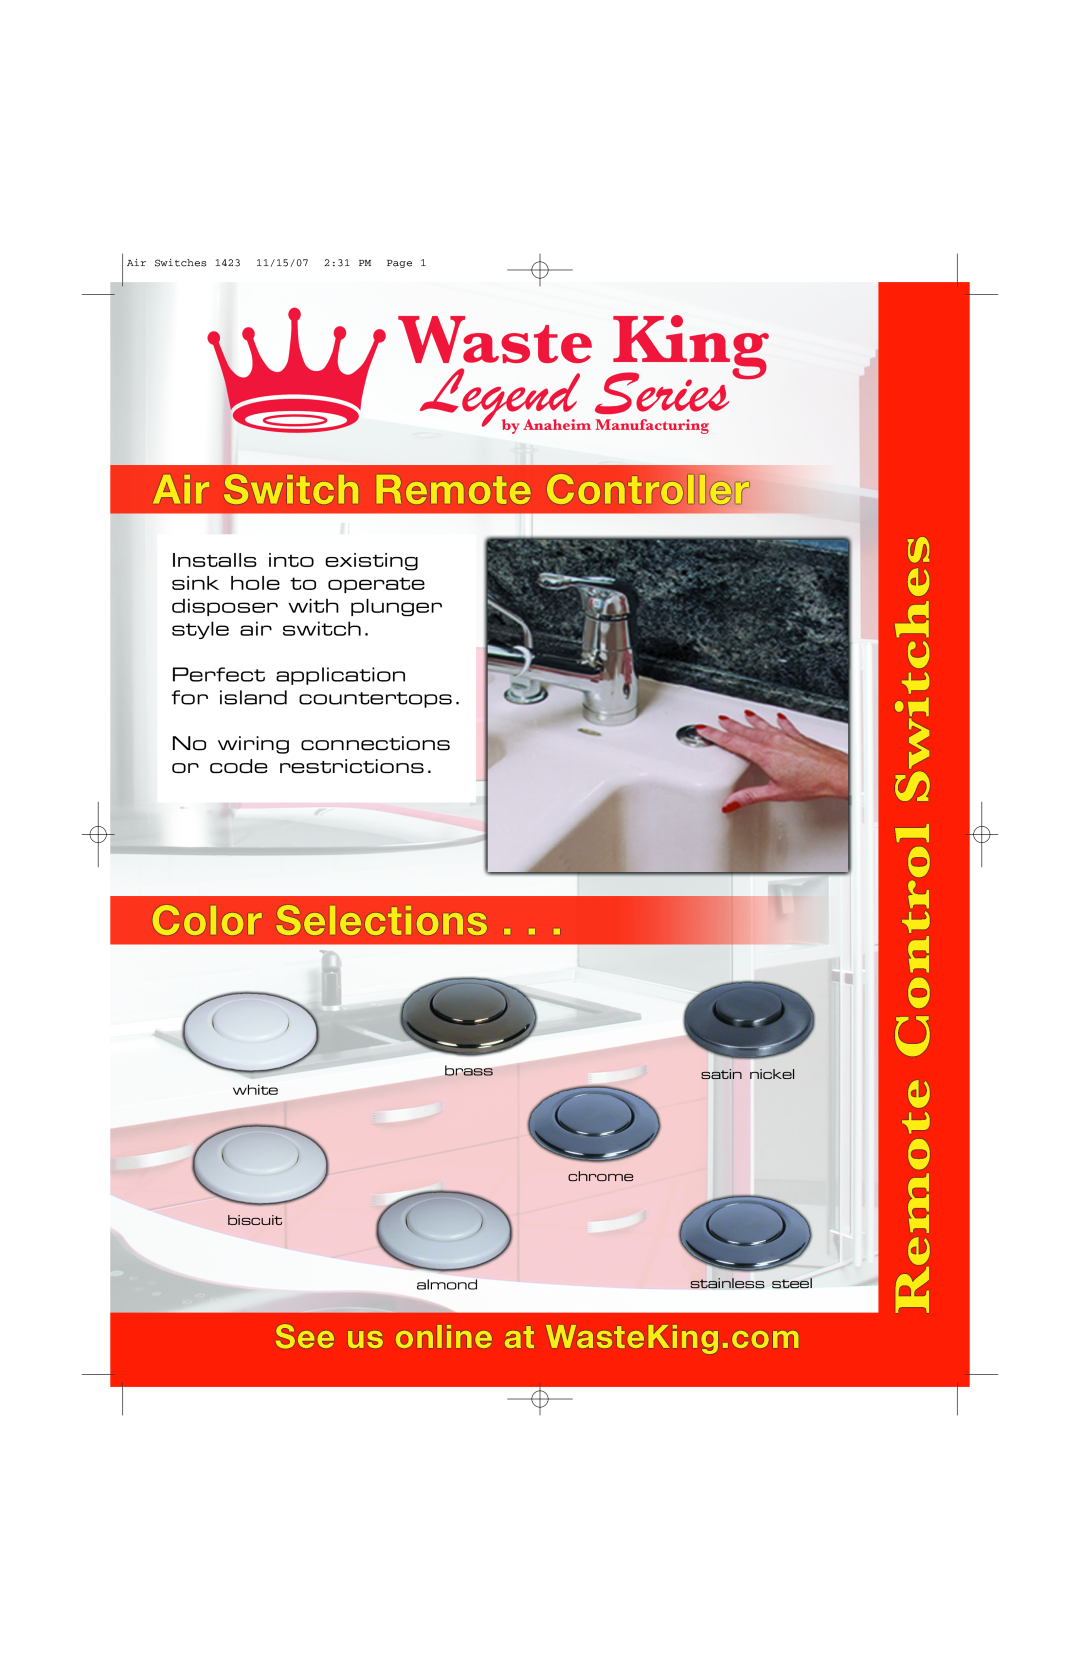 Waste King 1423 manual Perfect application for island countertops, No wiring connections or code restrictions, brass 